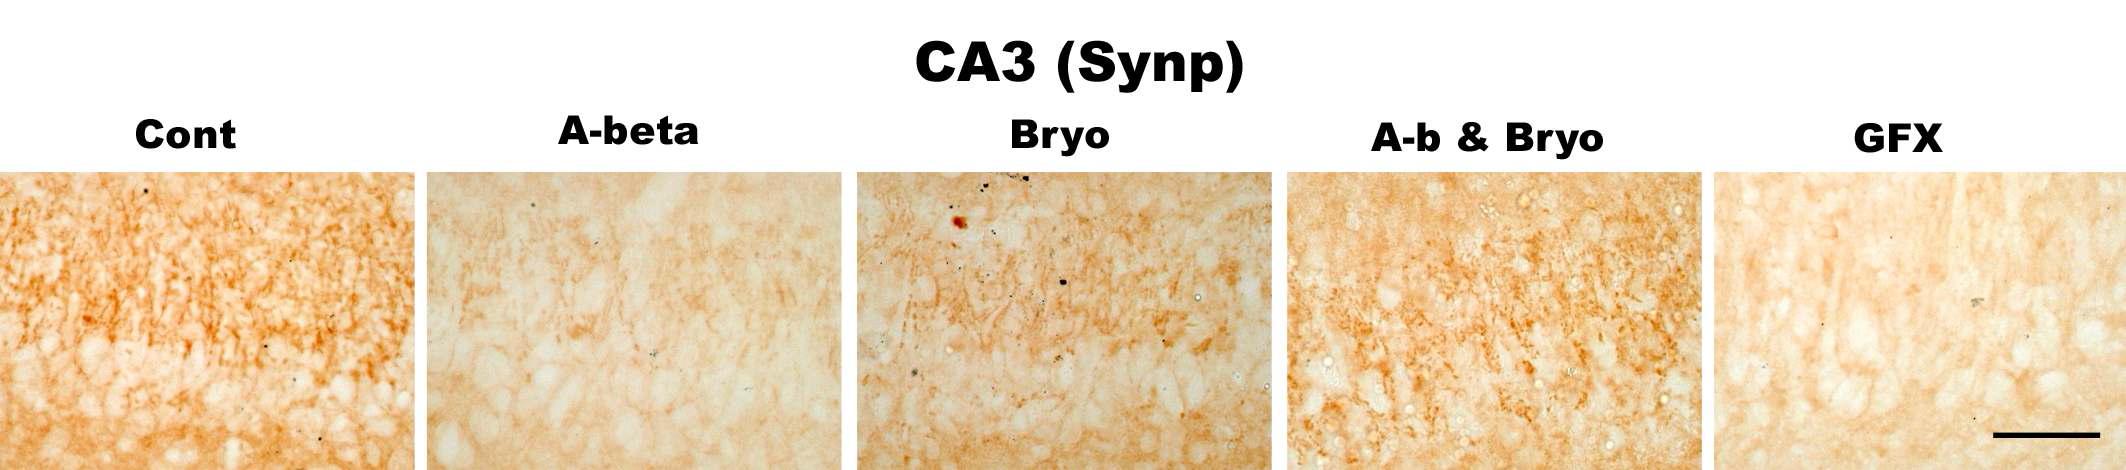 Effects of Bryostatin-1 on synapses in CA3 pyramidal neurons of hippocampus in rat. Bryostatin-1 significantly prevented reduction of synaptophysin (presynaptic protein) in CA3 of rat infused with amyloid beta. PKC inhibitor GFX 109203 reduces synaptophysin in CA3. Intracerebro-ventricular infusion of Aβ and Bryostatin-1 was for four weeks using a micro-osmotic pump. PKC inhibitor GFX 109203 was administrated with I.c.v. injection. Immuno- histochemistry (anti-CD11b) (scale bar, 50μm)(40Χ magnification)